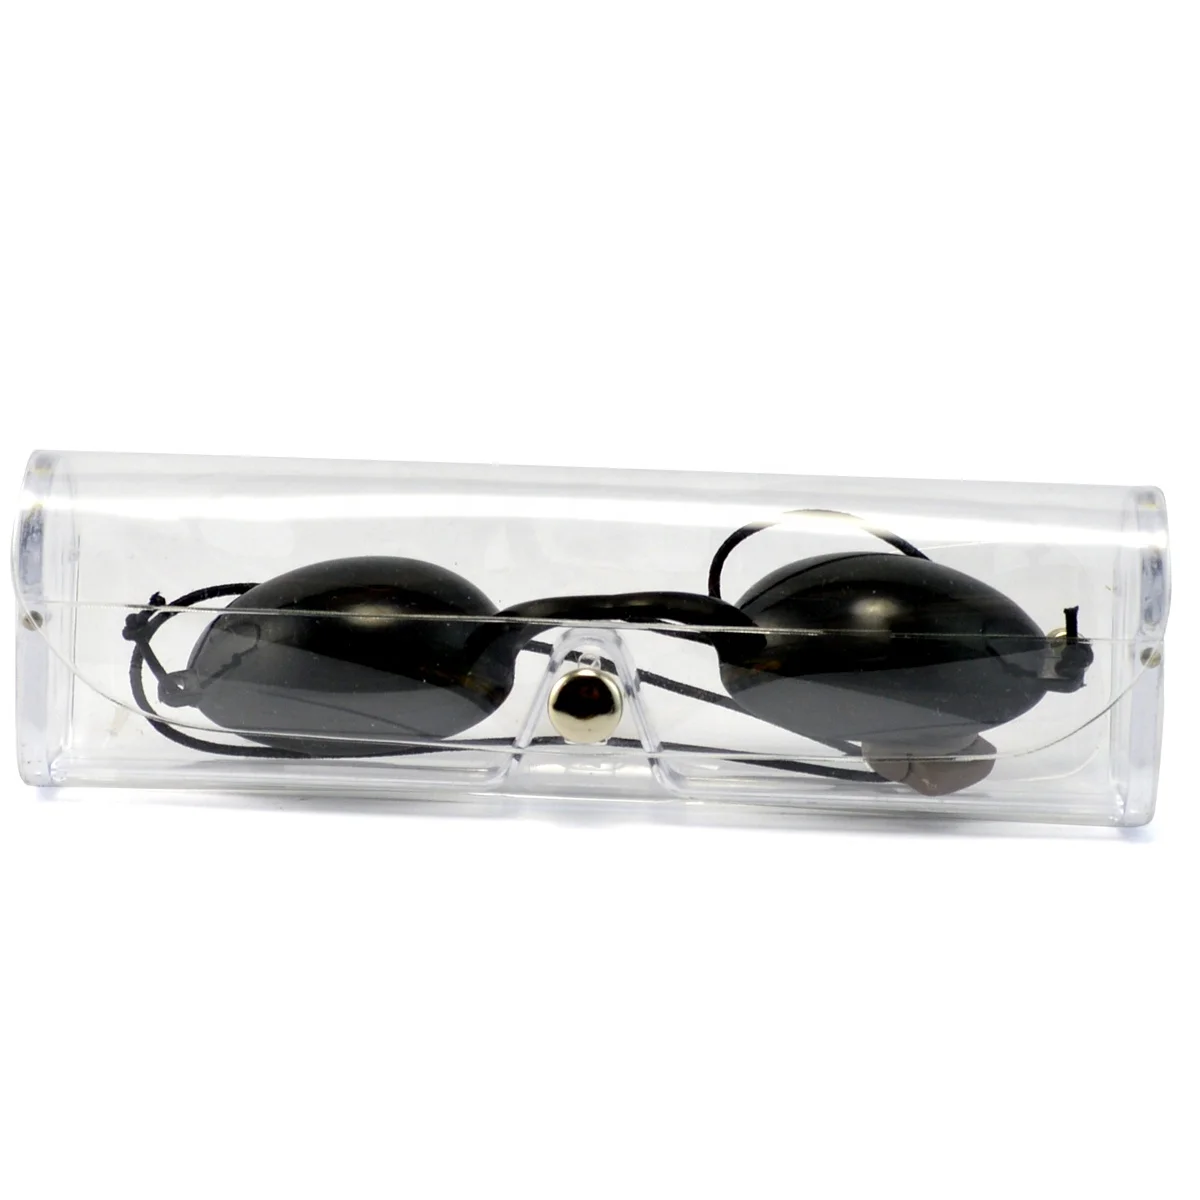 Safety Goggles Eye Protection Glasses Tanning Goggles Eyewear Eyepatch for Patients in IPL Infrared LED Light Therapy